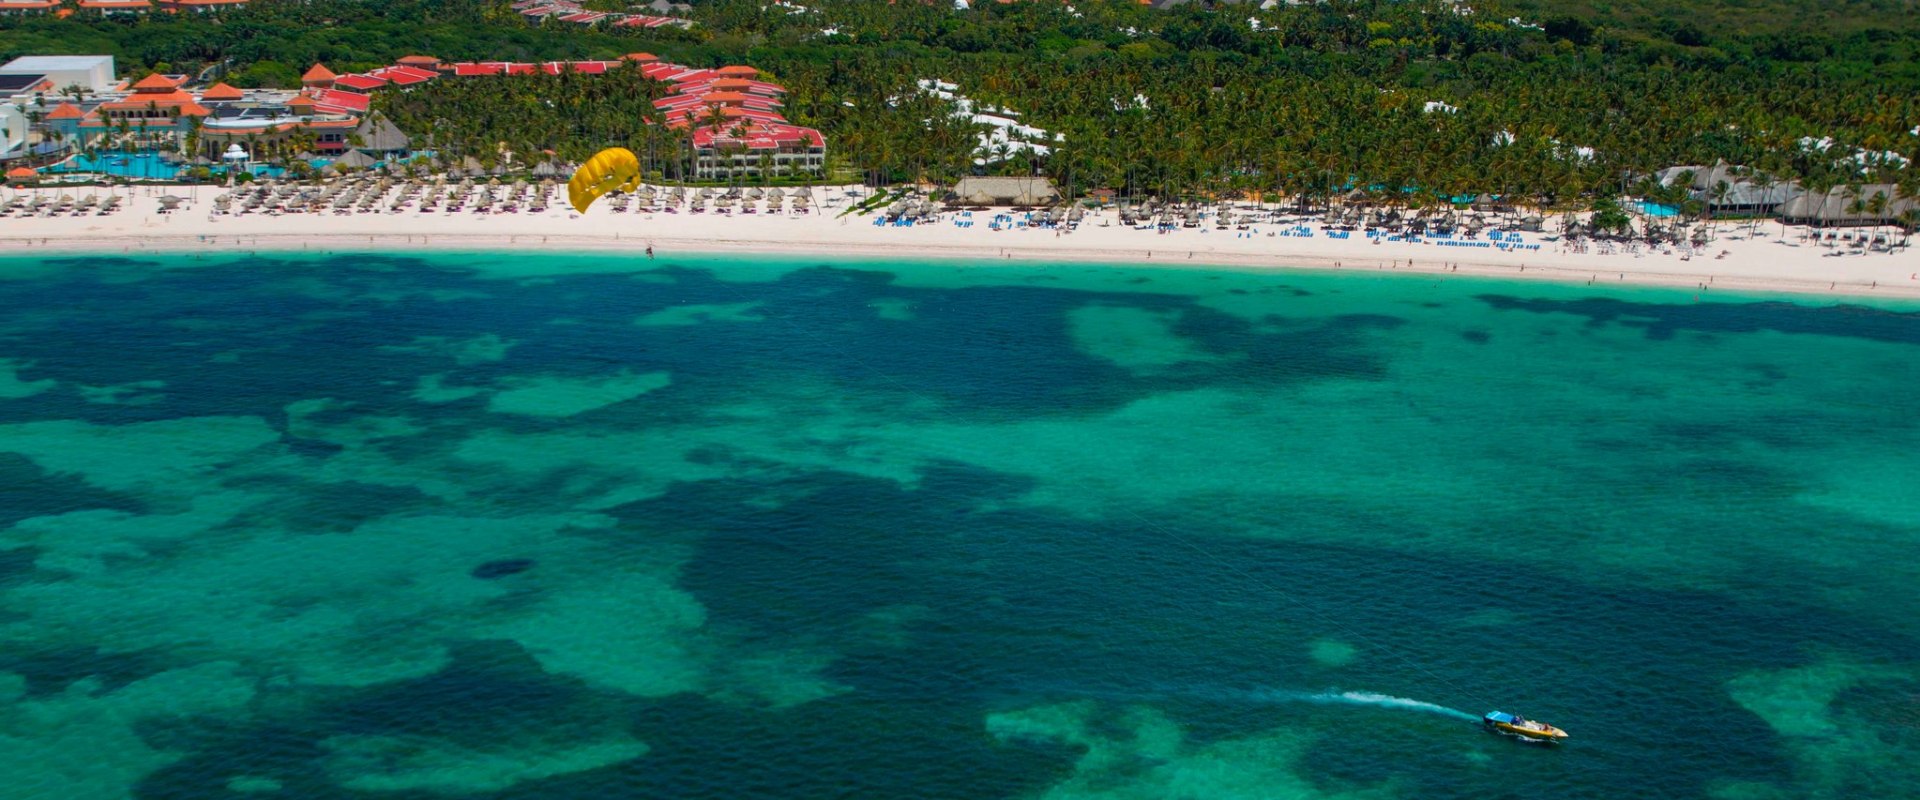 Which resorts in punta cana had deaths?